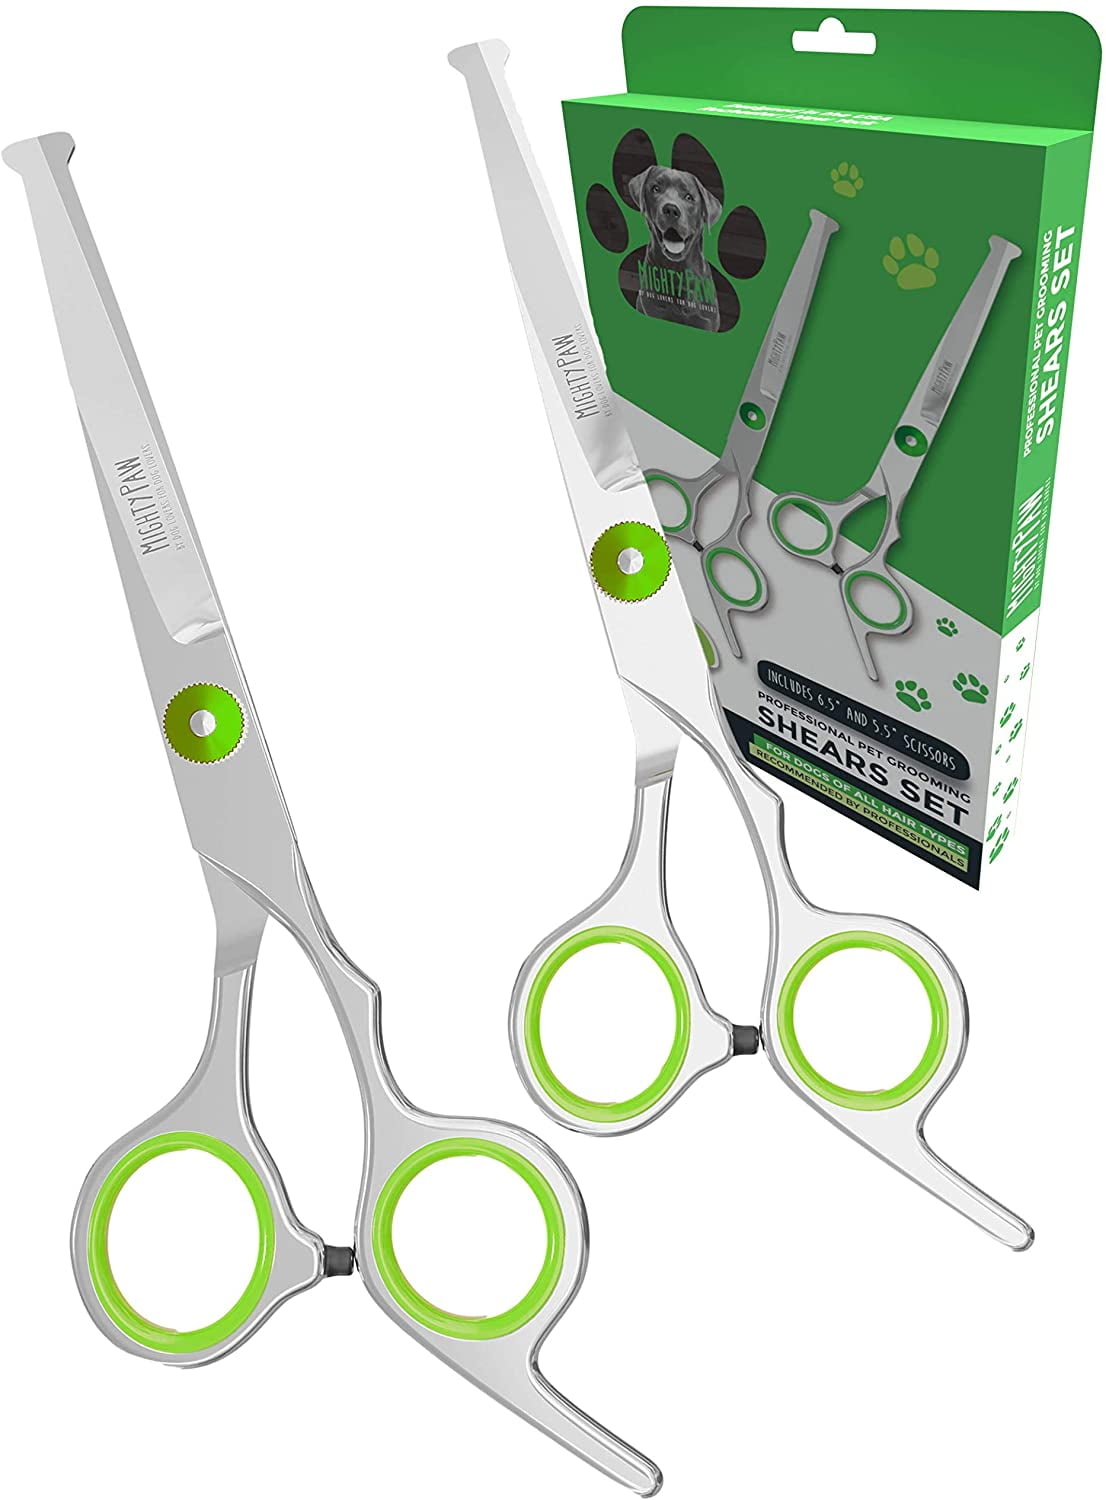 Details about   HEDGE SHEARS 8" CURVED BLADE NEW 